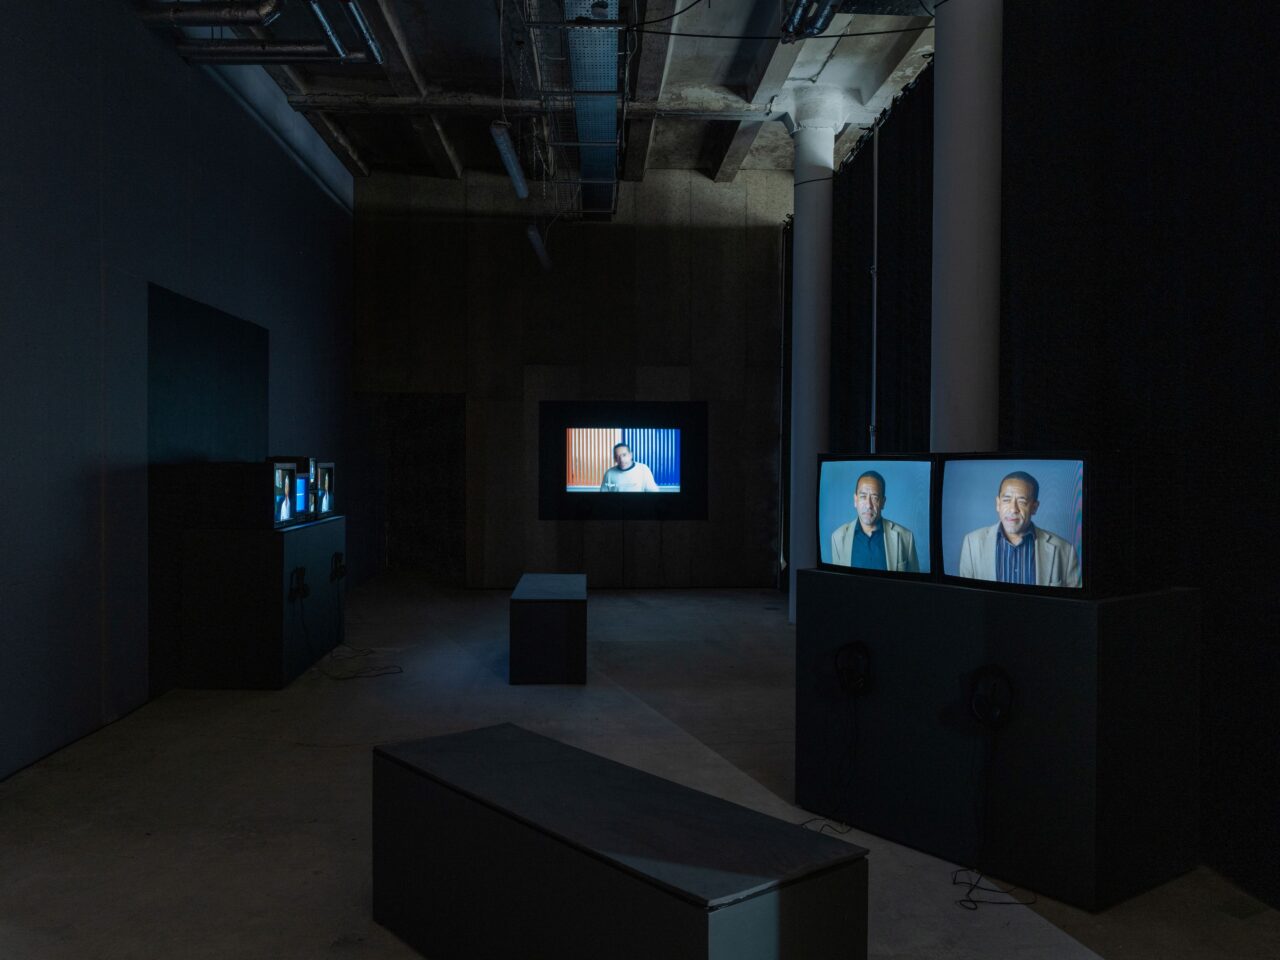 A dark room with multiple screens of different sizes in it, showing excerpts from a filming process⁠.